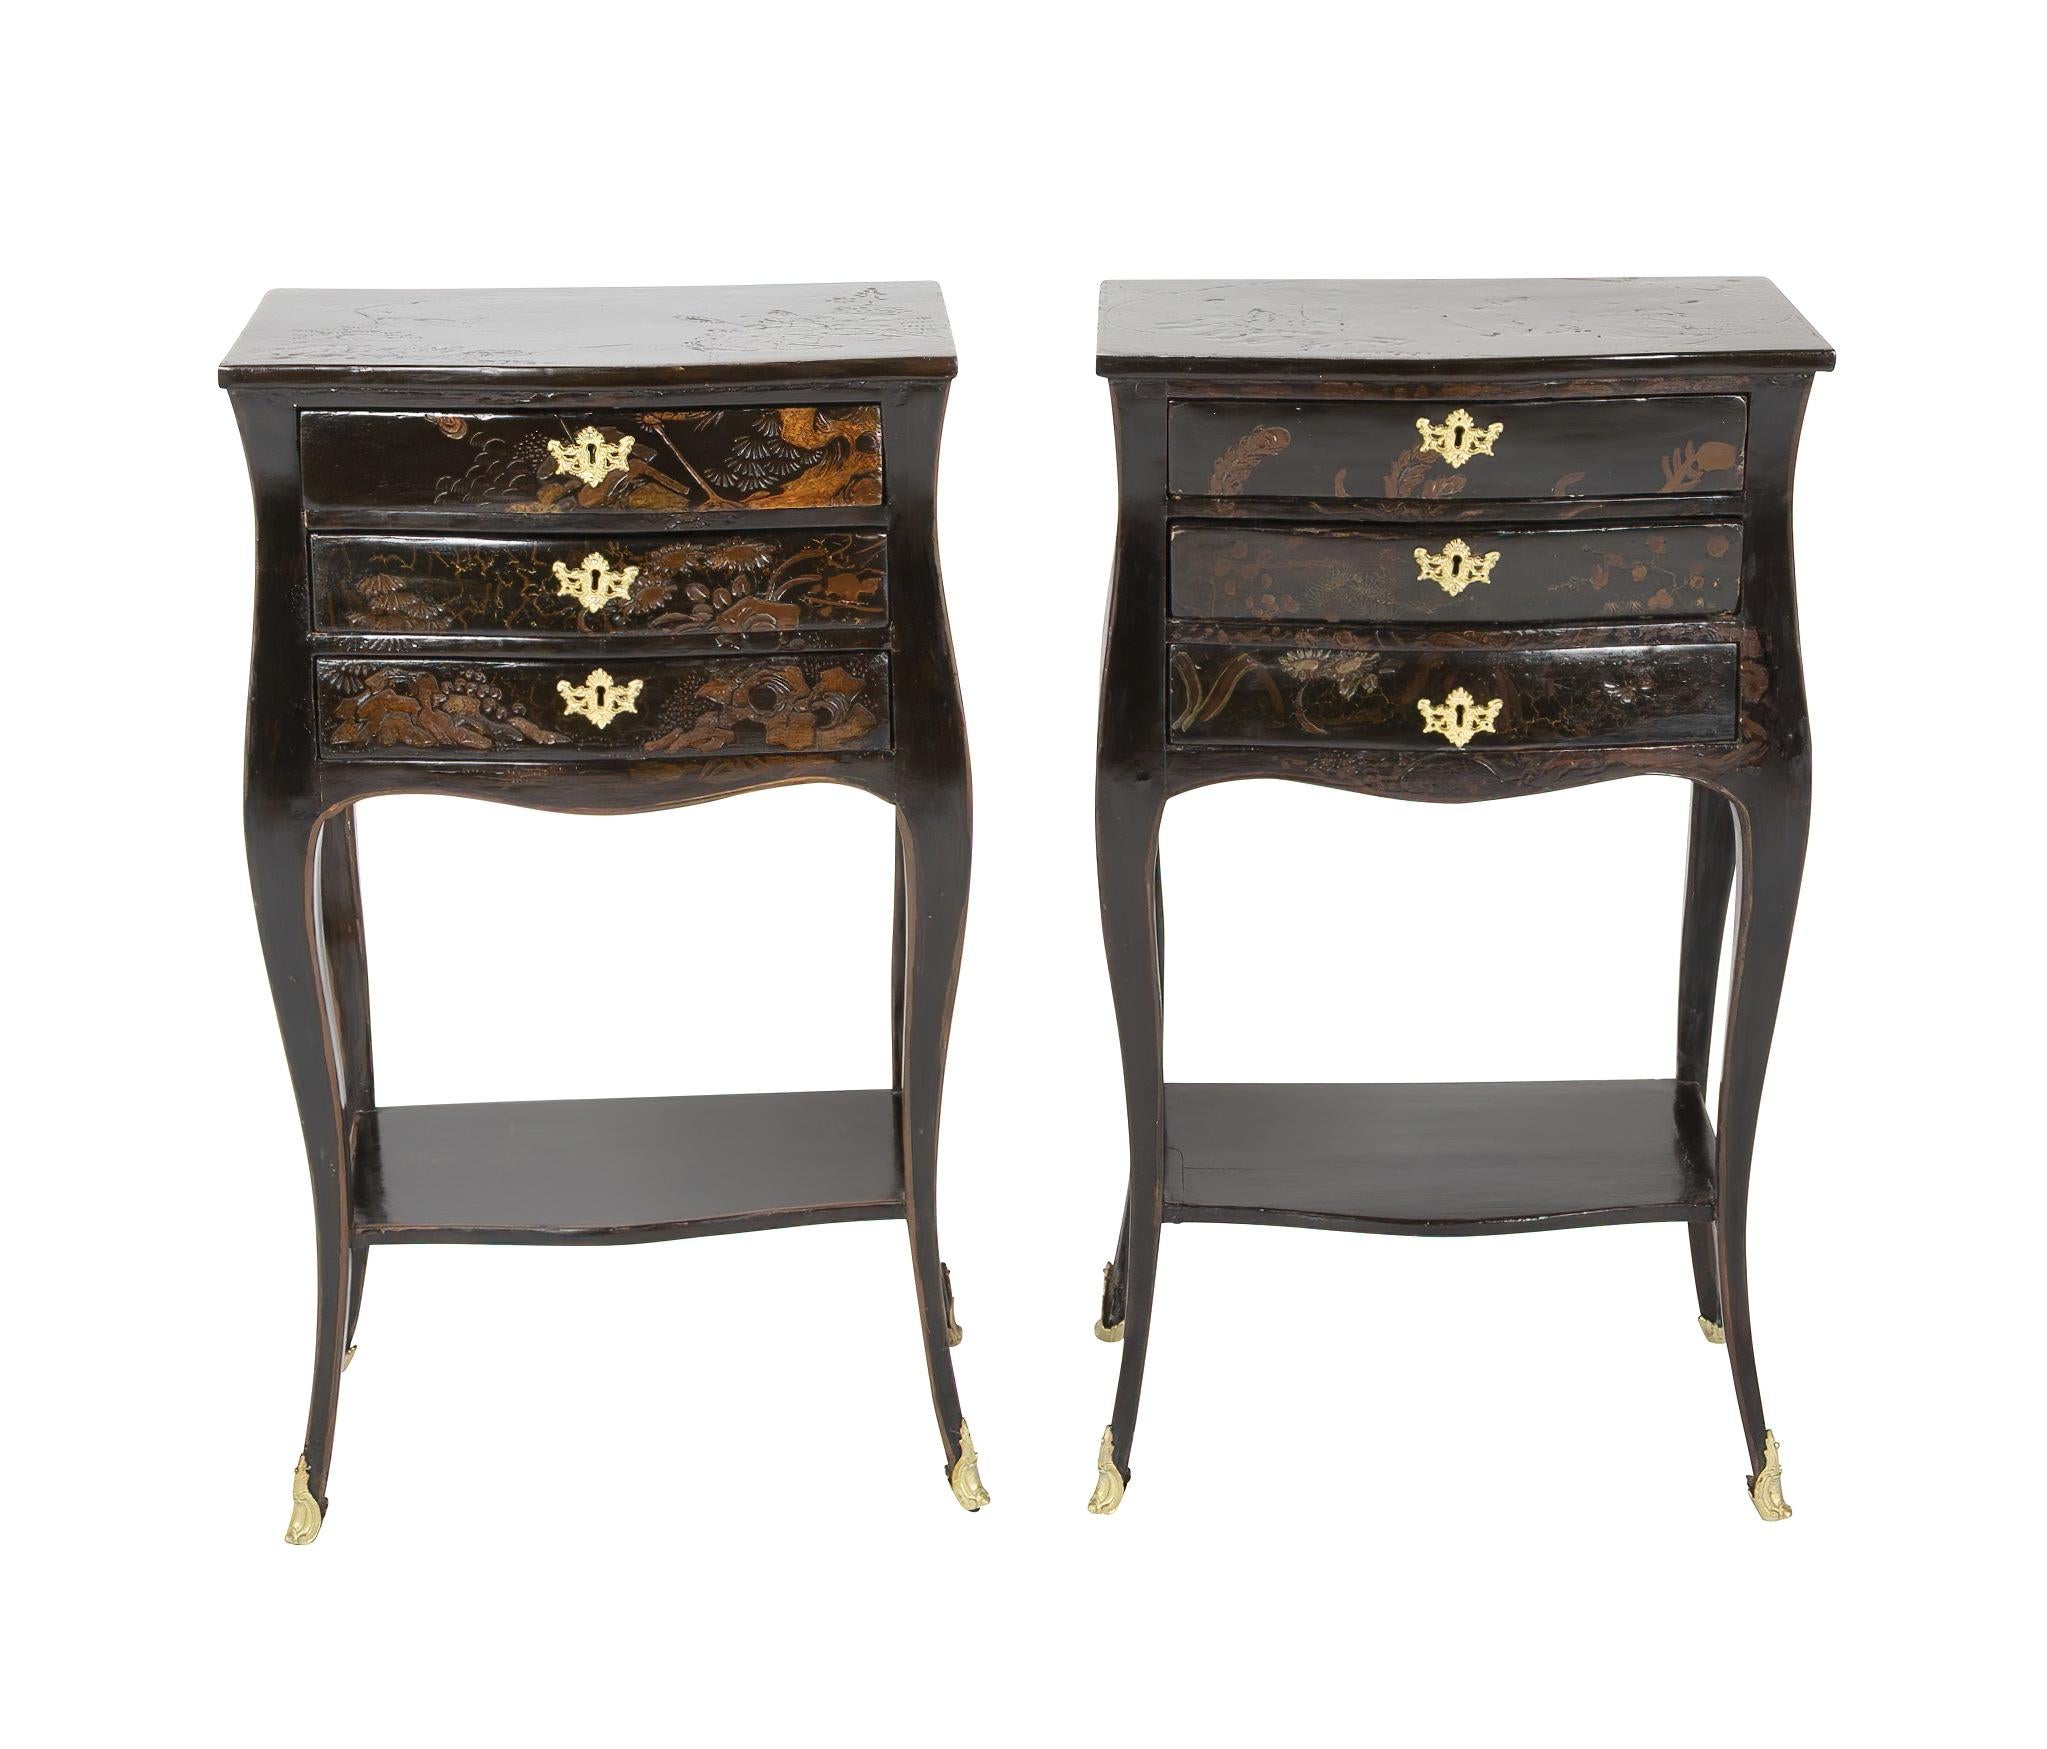 A pair of Louis XV black lacquered petit commodes with chinoiserie decoration. The Bombay and serpentine commodes each have three drawers, cabriole legs, bronze mounts, and a shelf stretcher base.